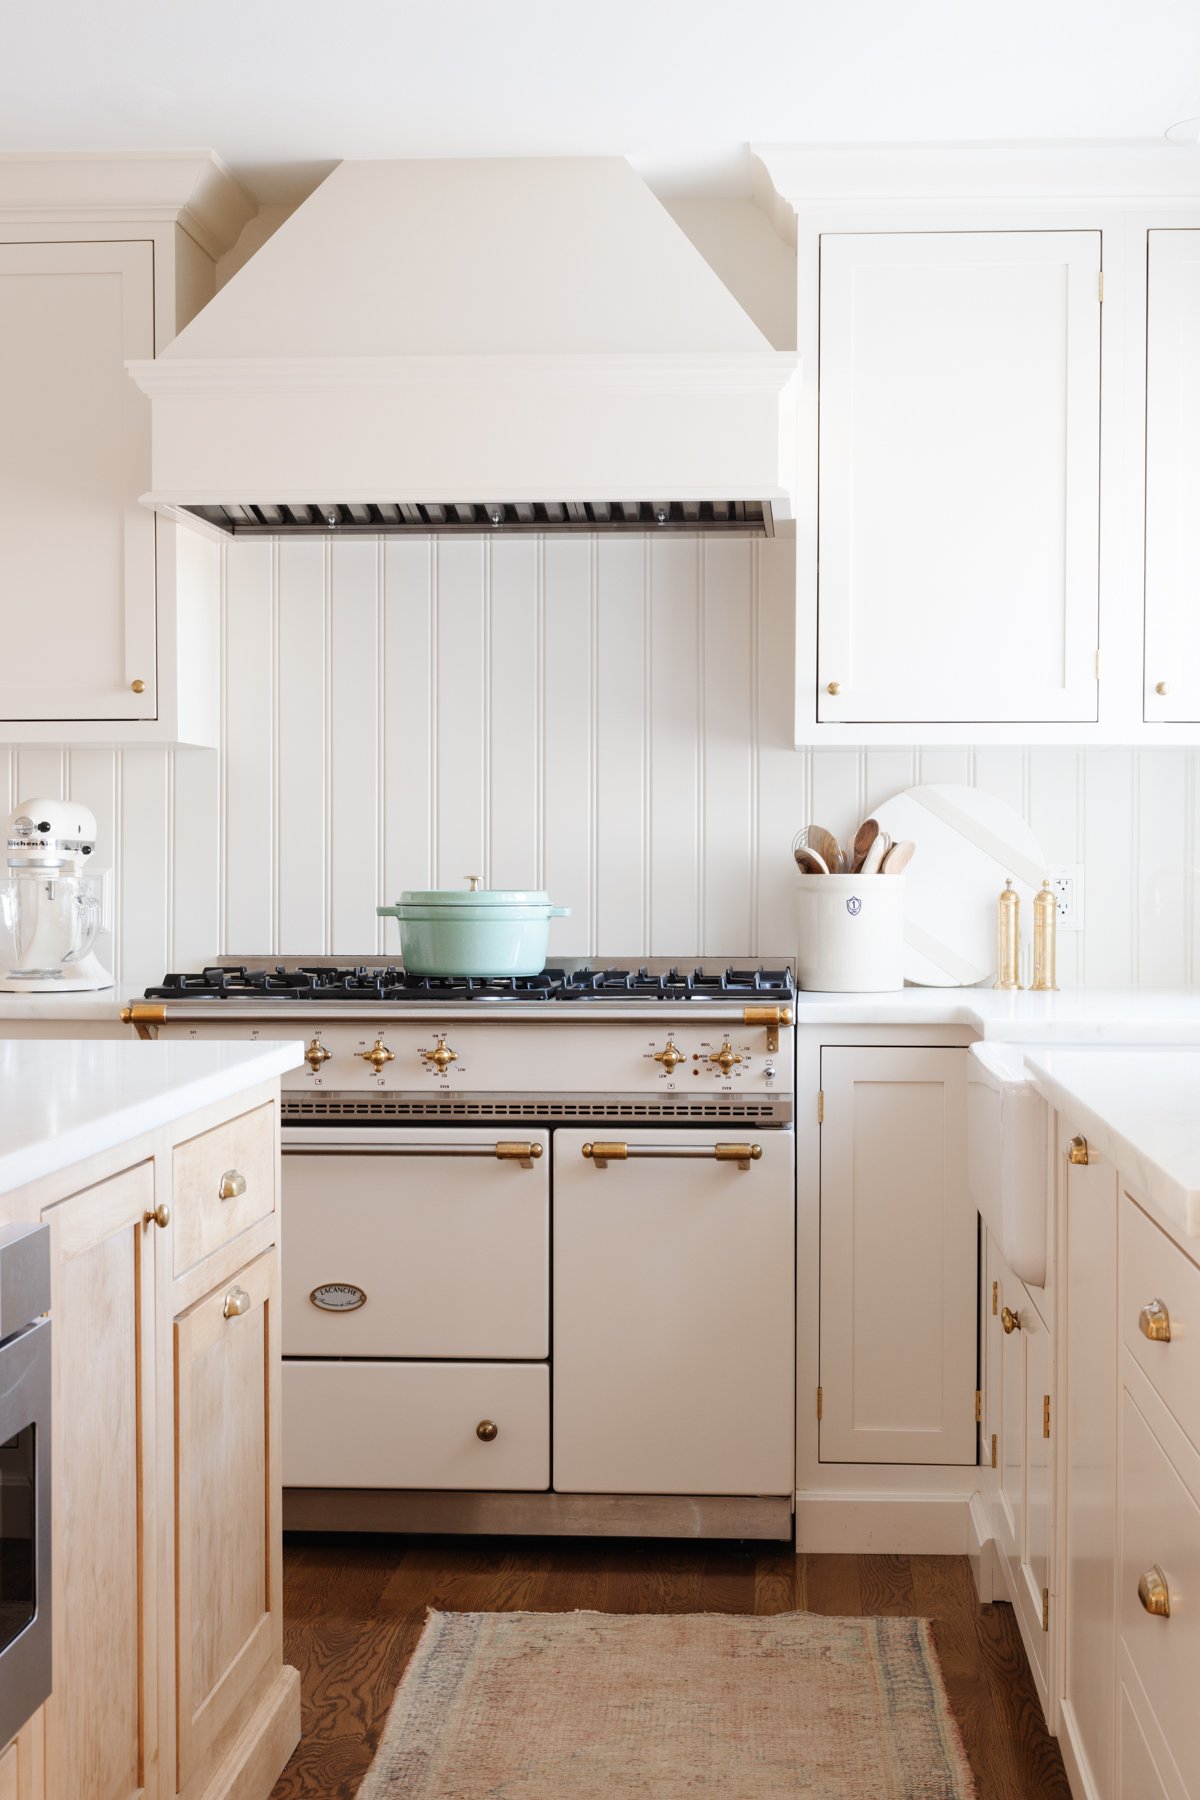 A cream kitchen with a beadboard backsplash and an insert range hood with a wood cover.